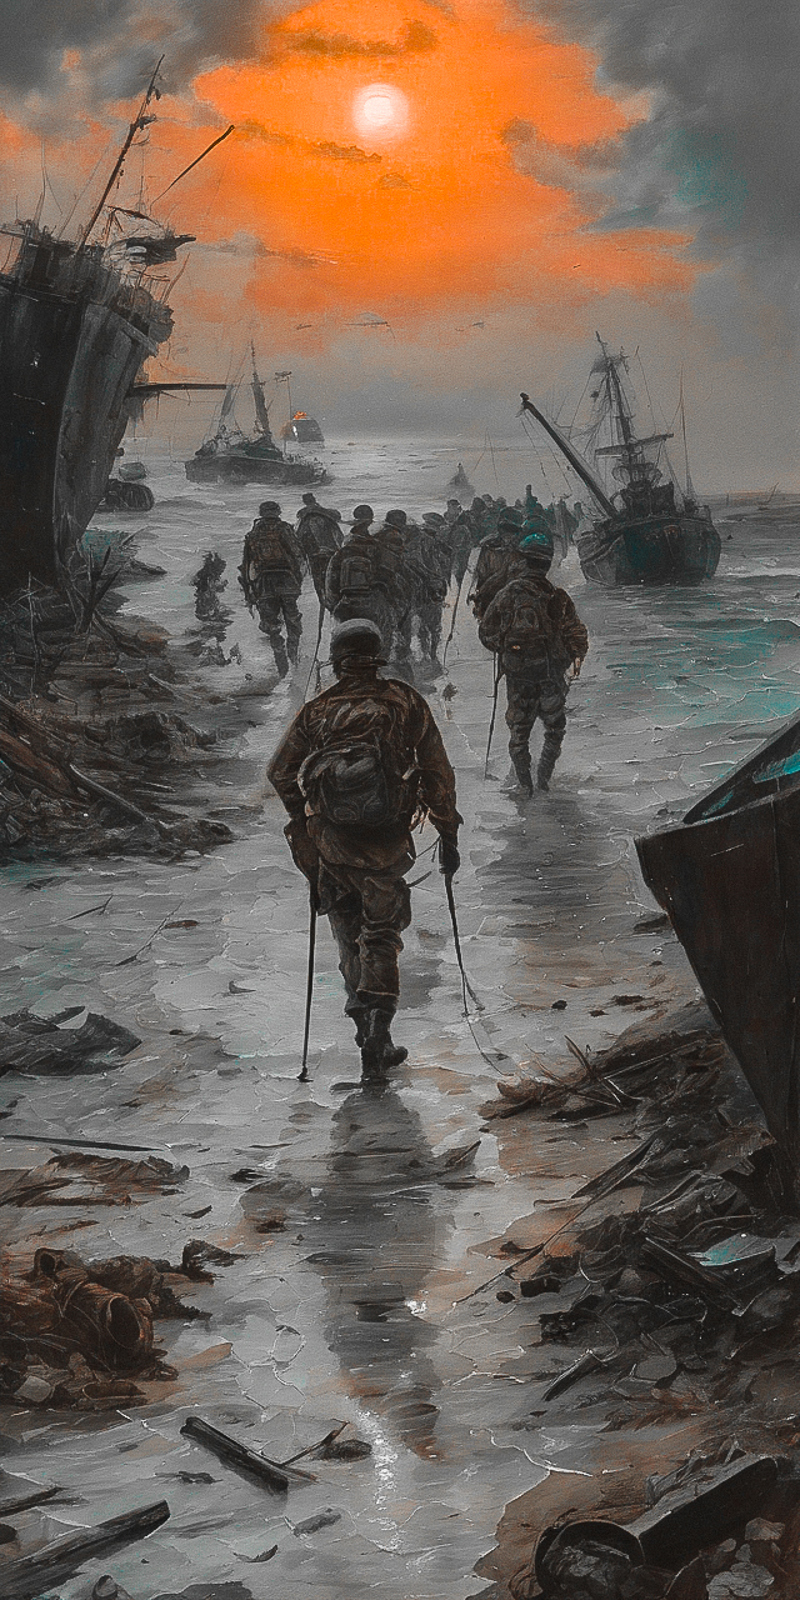 A group of soldiers walking through a flooded area.